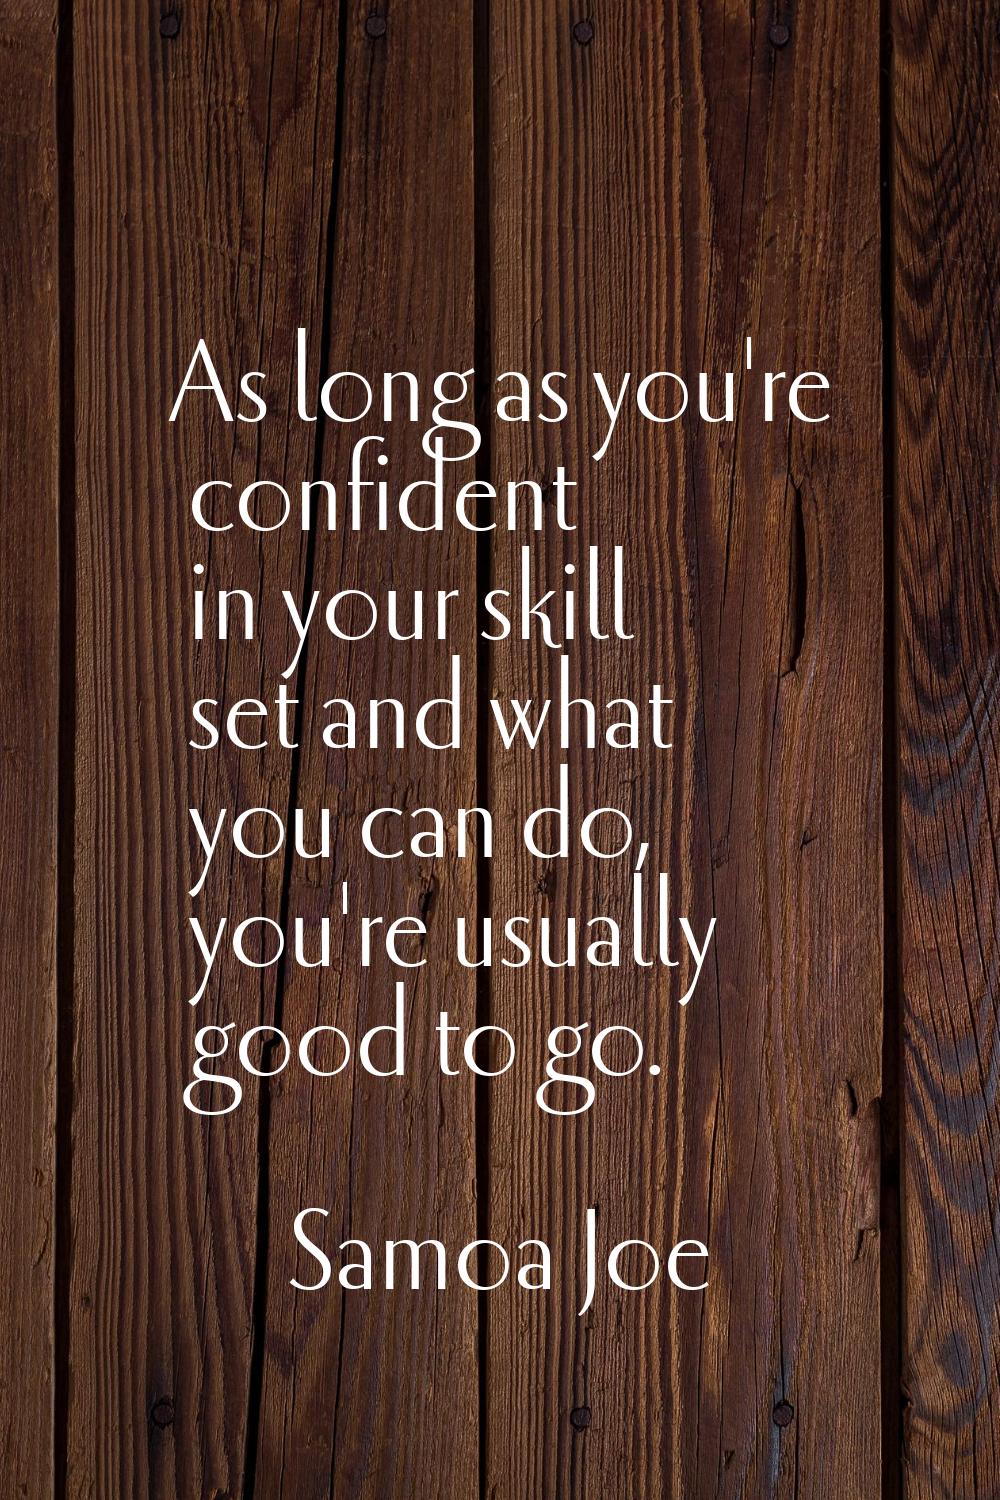 As long as you're confident in your skill set and what you can do, you're usually good to go.